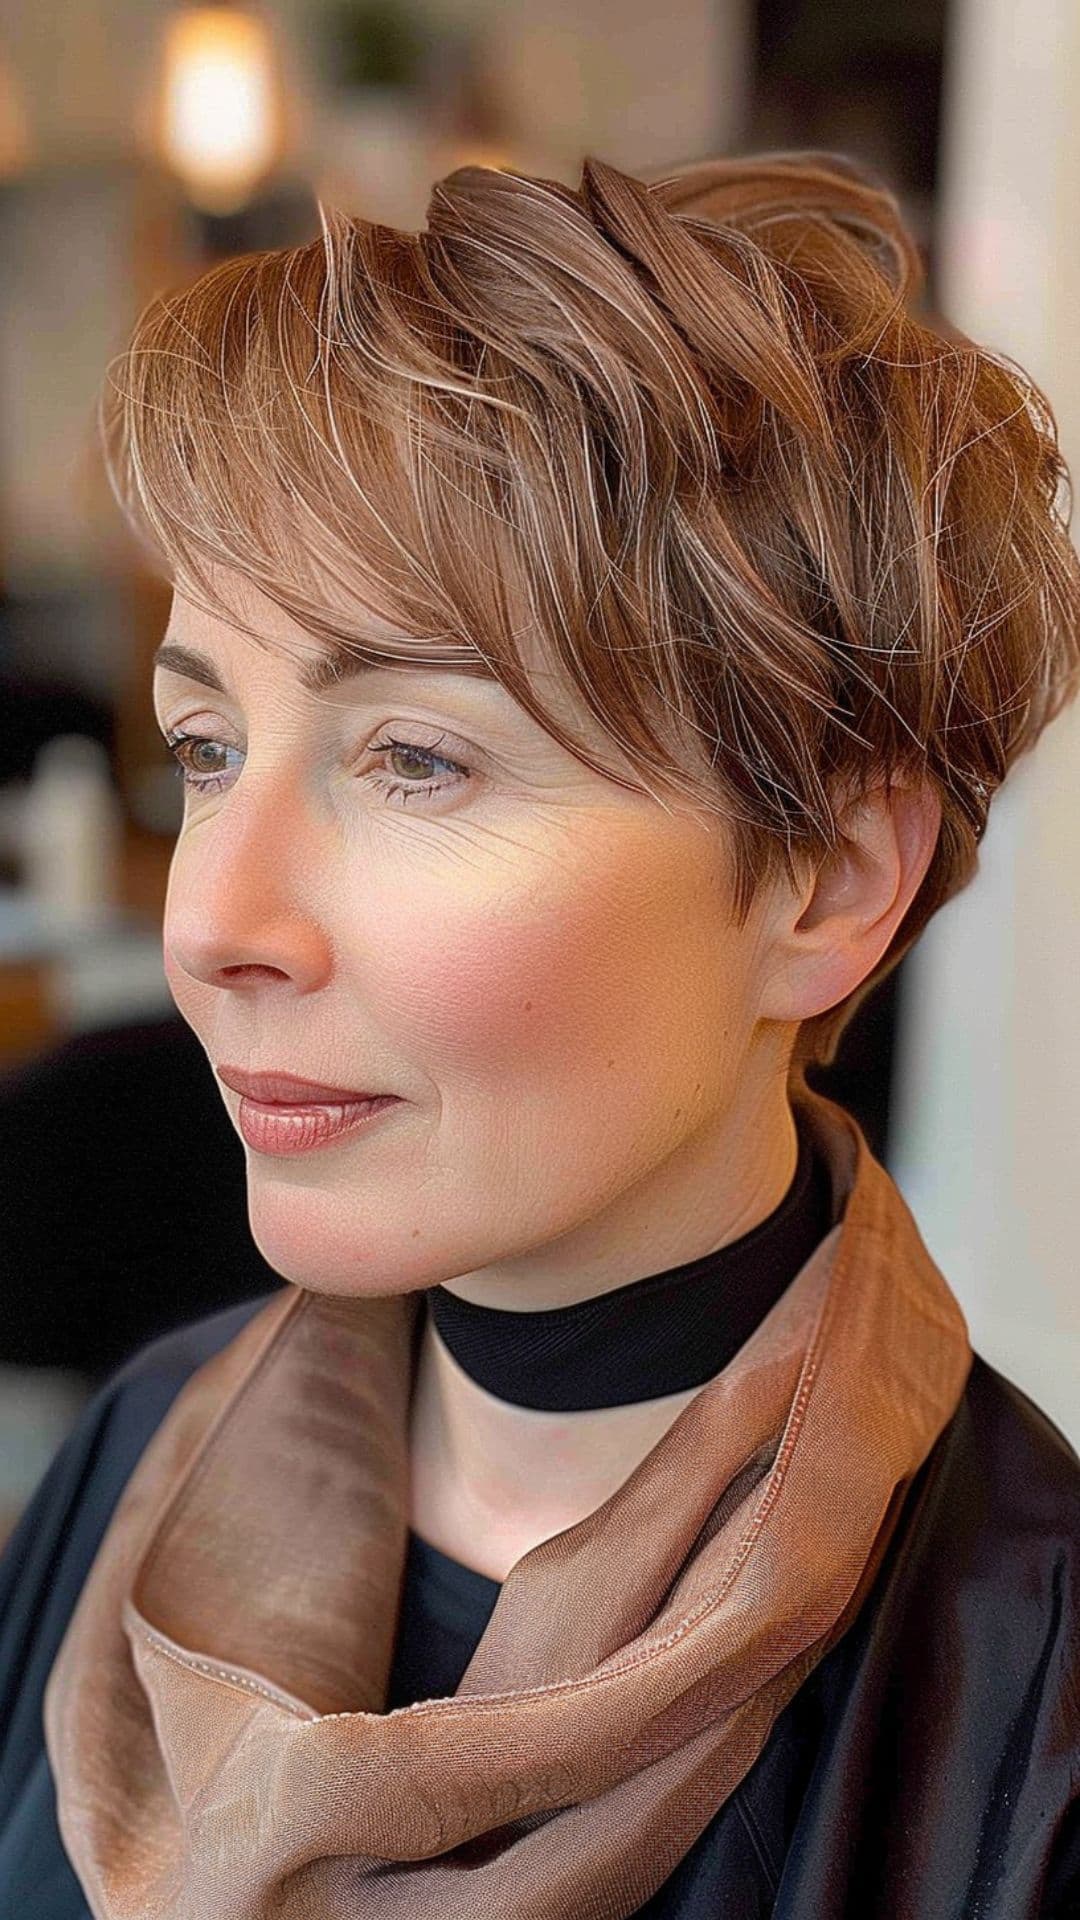 An older woman modelling a long pixie cut with side-swept bangs.